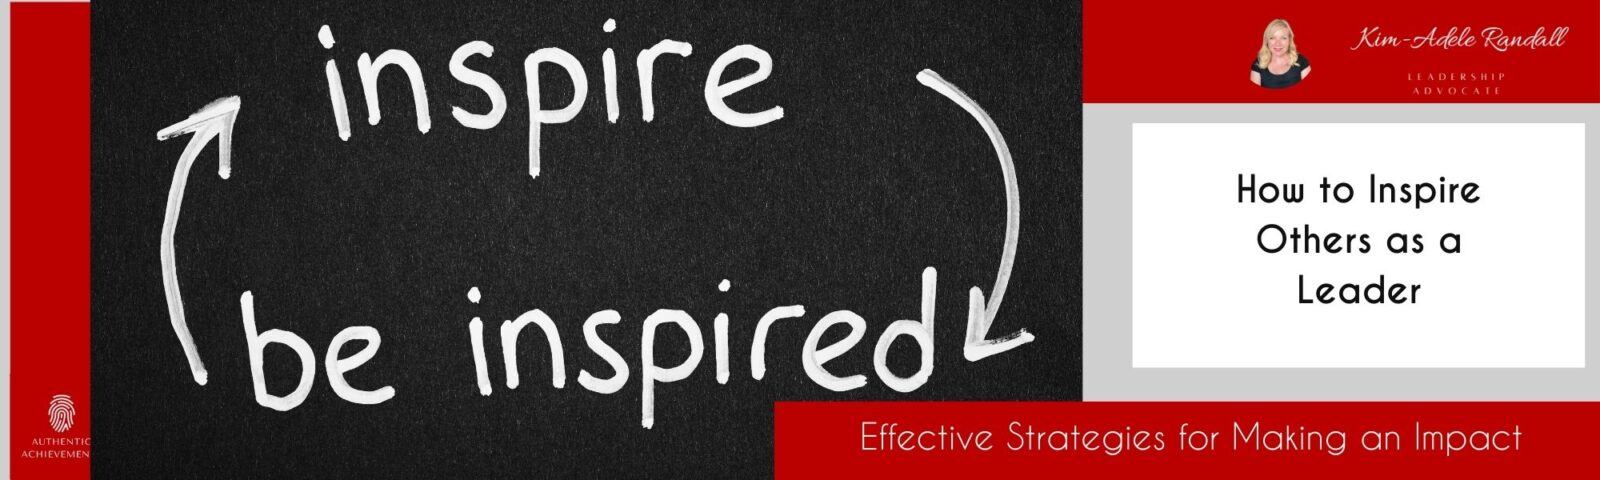 How to Inspire Others as a Leader: Effective Strategies for Making an Impact